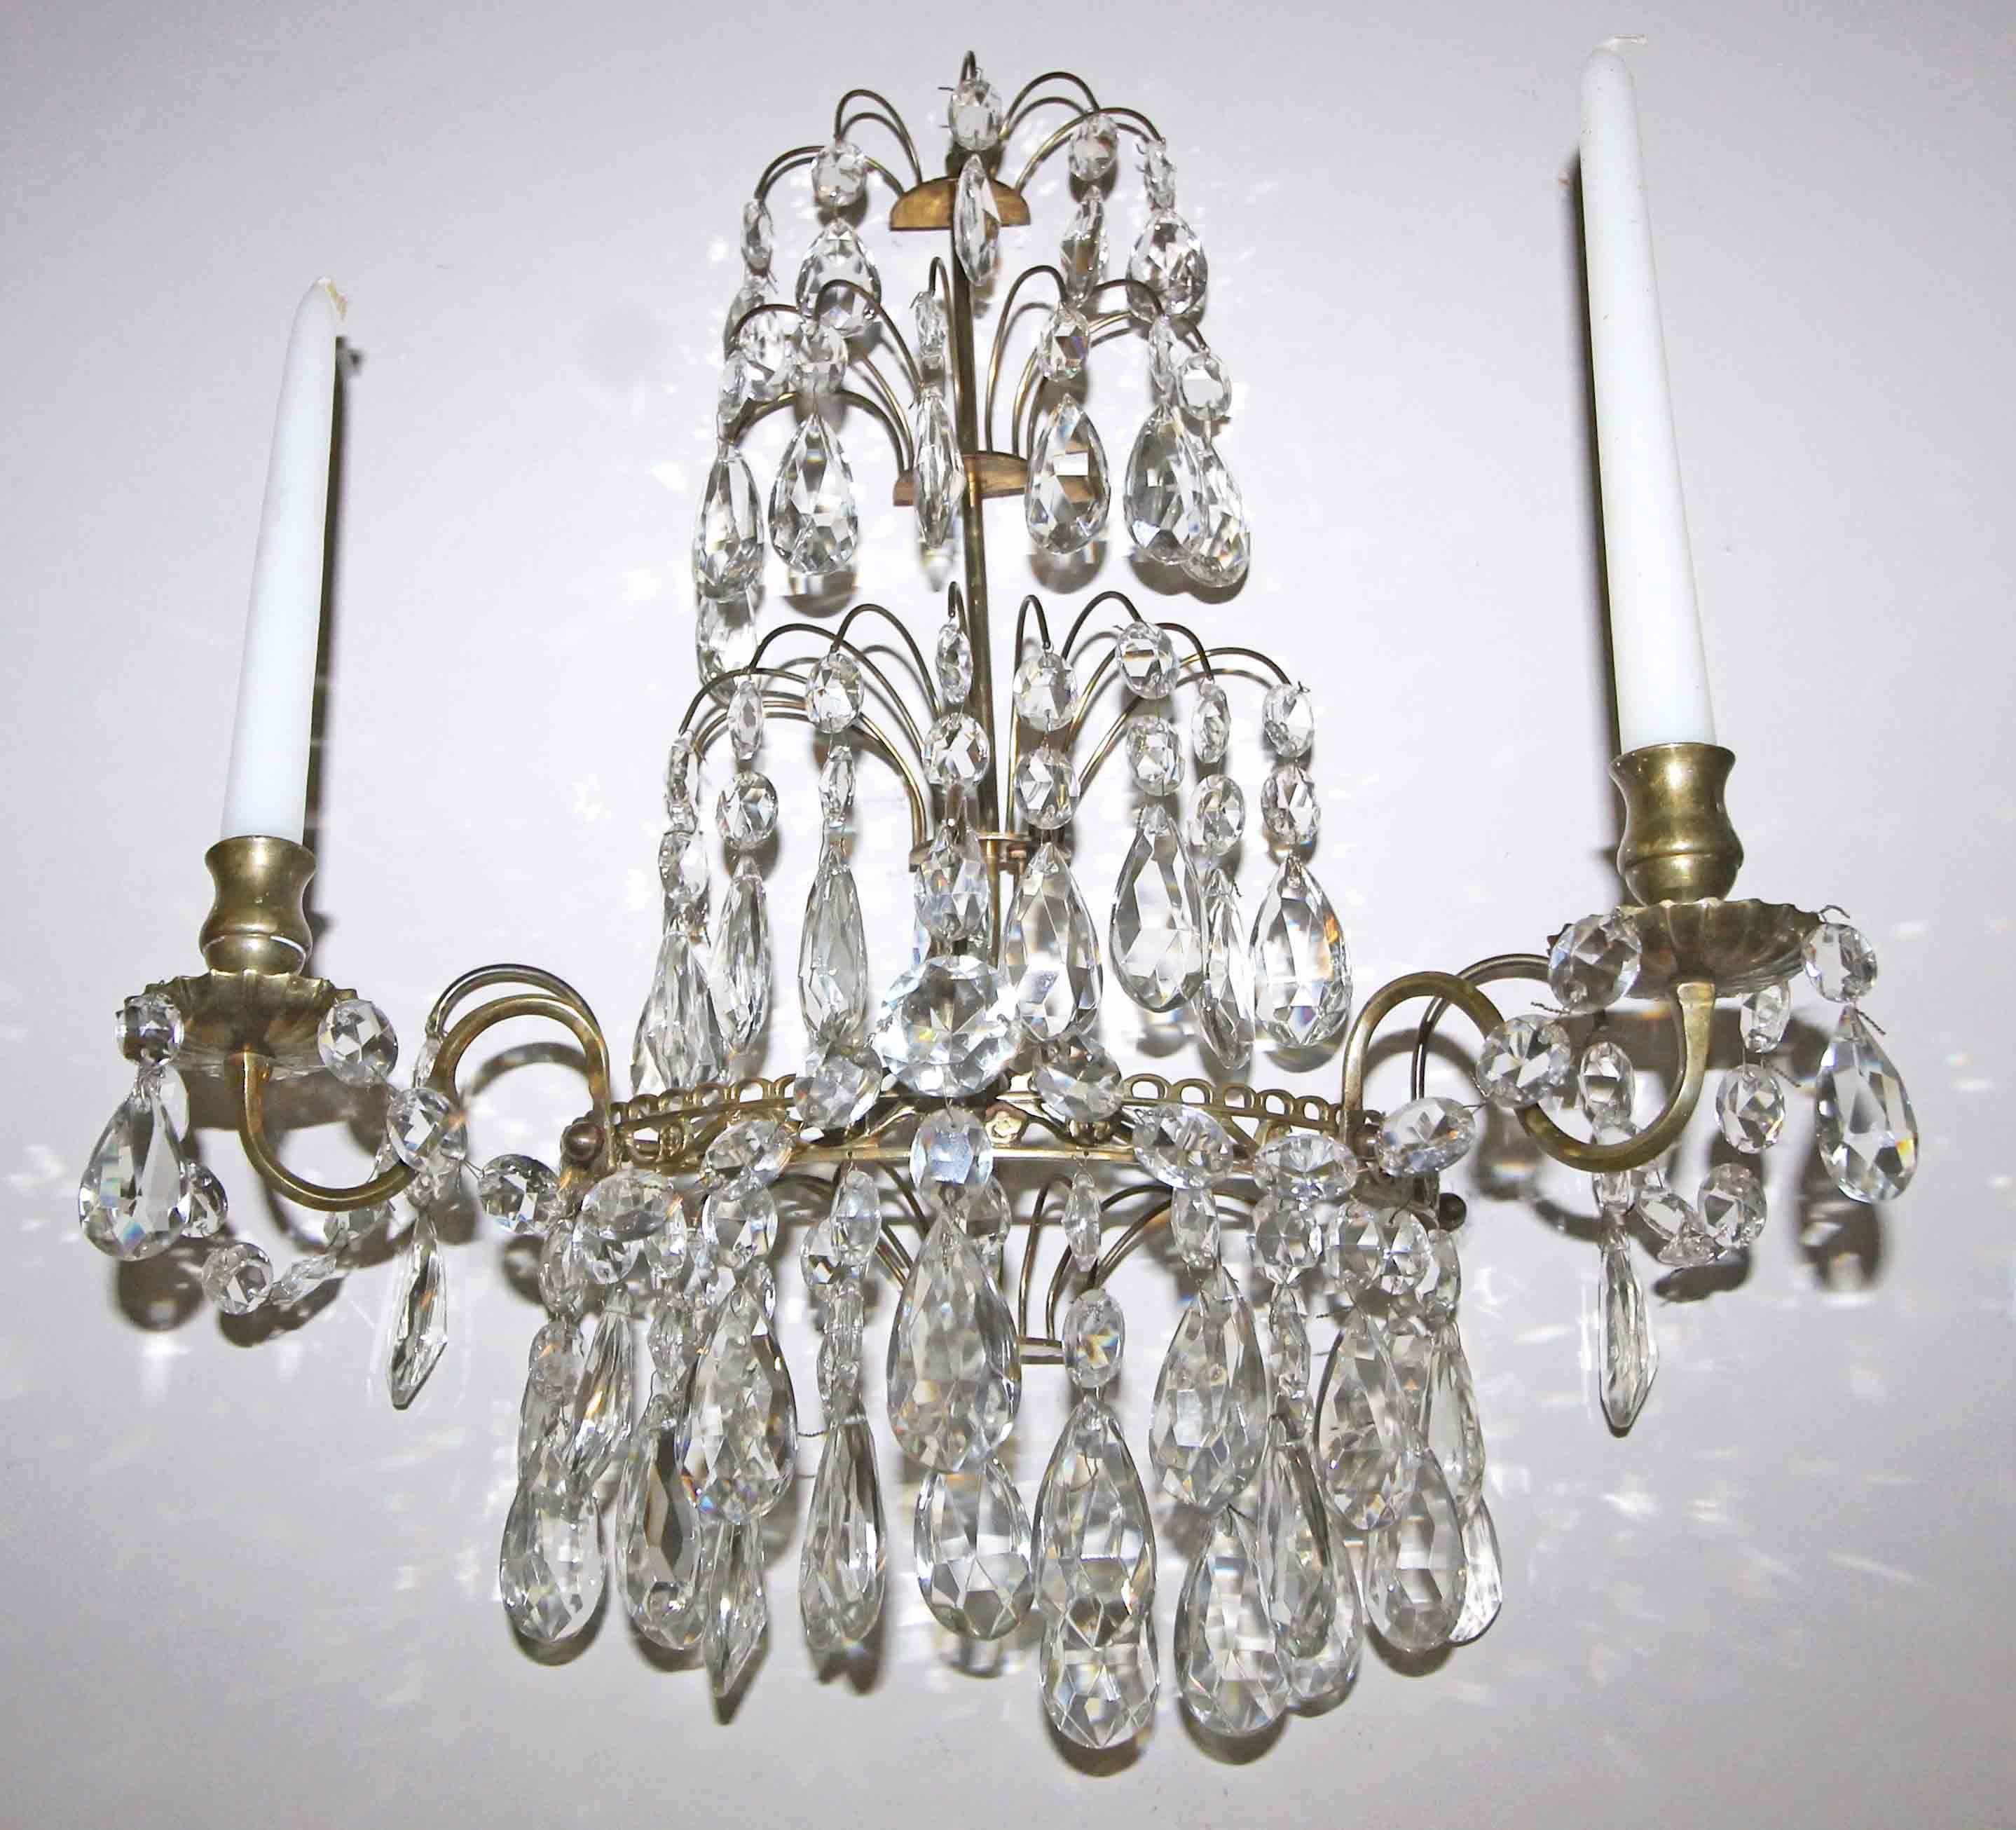 Early 20th Century Pair of Swedish Gustavian Style Crystal and Brass Candle Wall Sconces For Sale